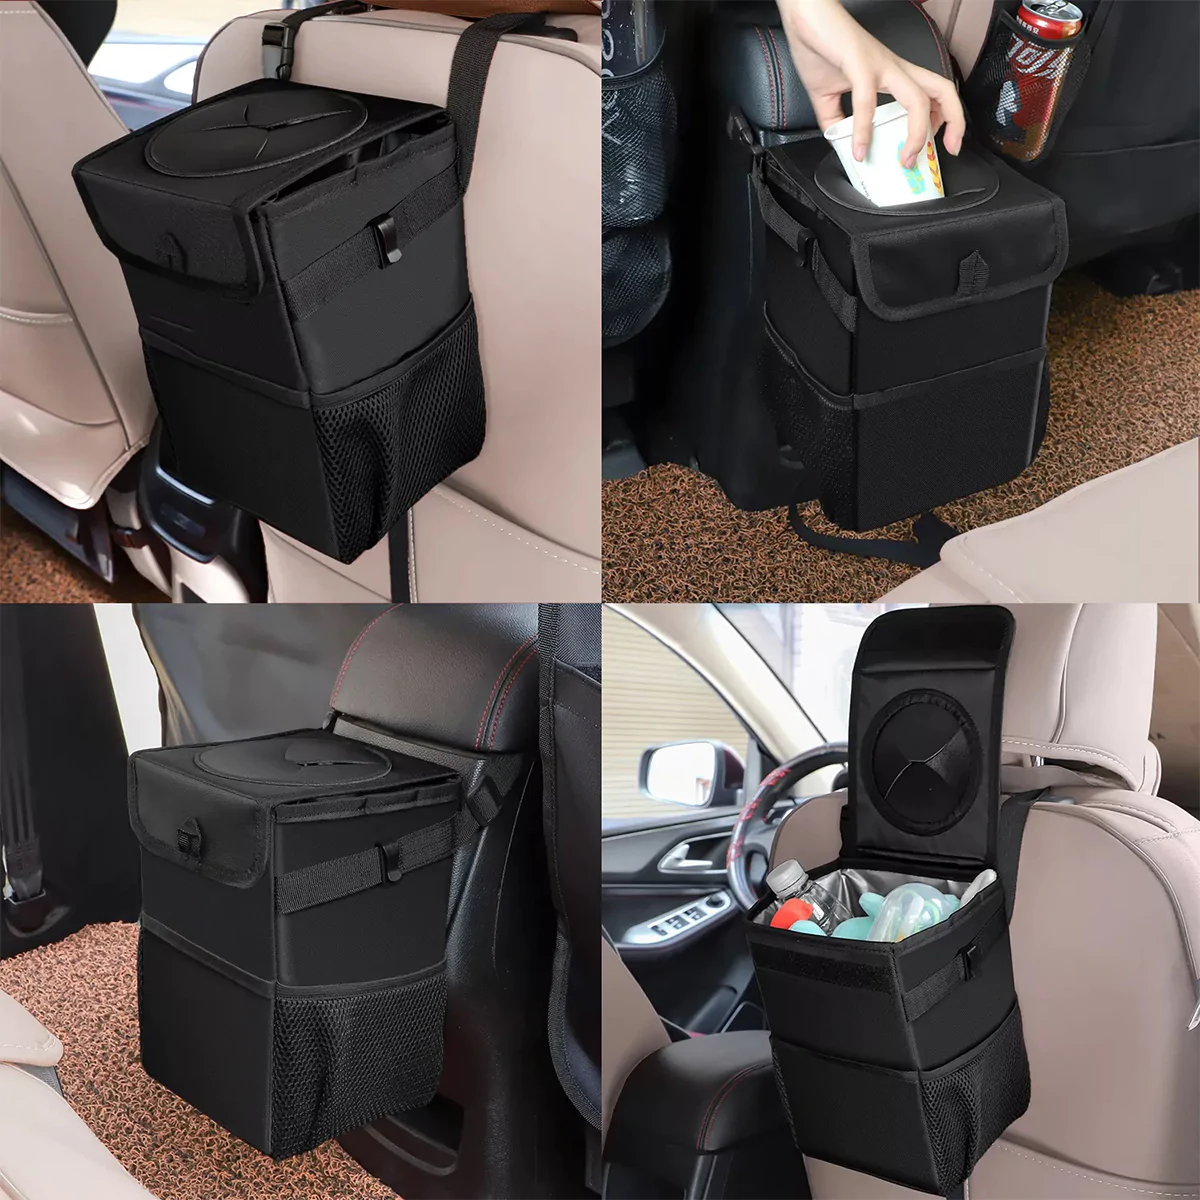 Waterproof Car Trash Can with Lid and Storage Pockets, Custom-Fit For Car, 100% Leak-Proof Car Organizer, Waterproof Car Garbage Can, Multipurpose Trash Bin for Car DLLE234